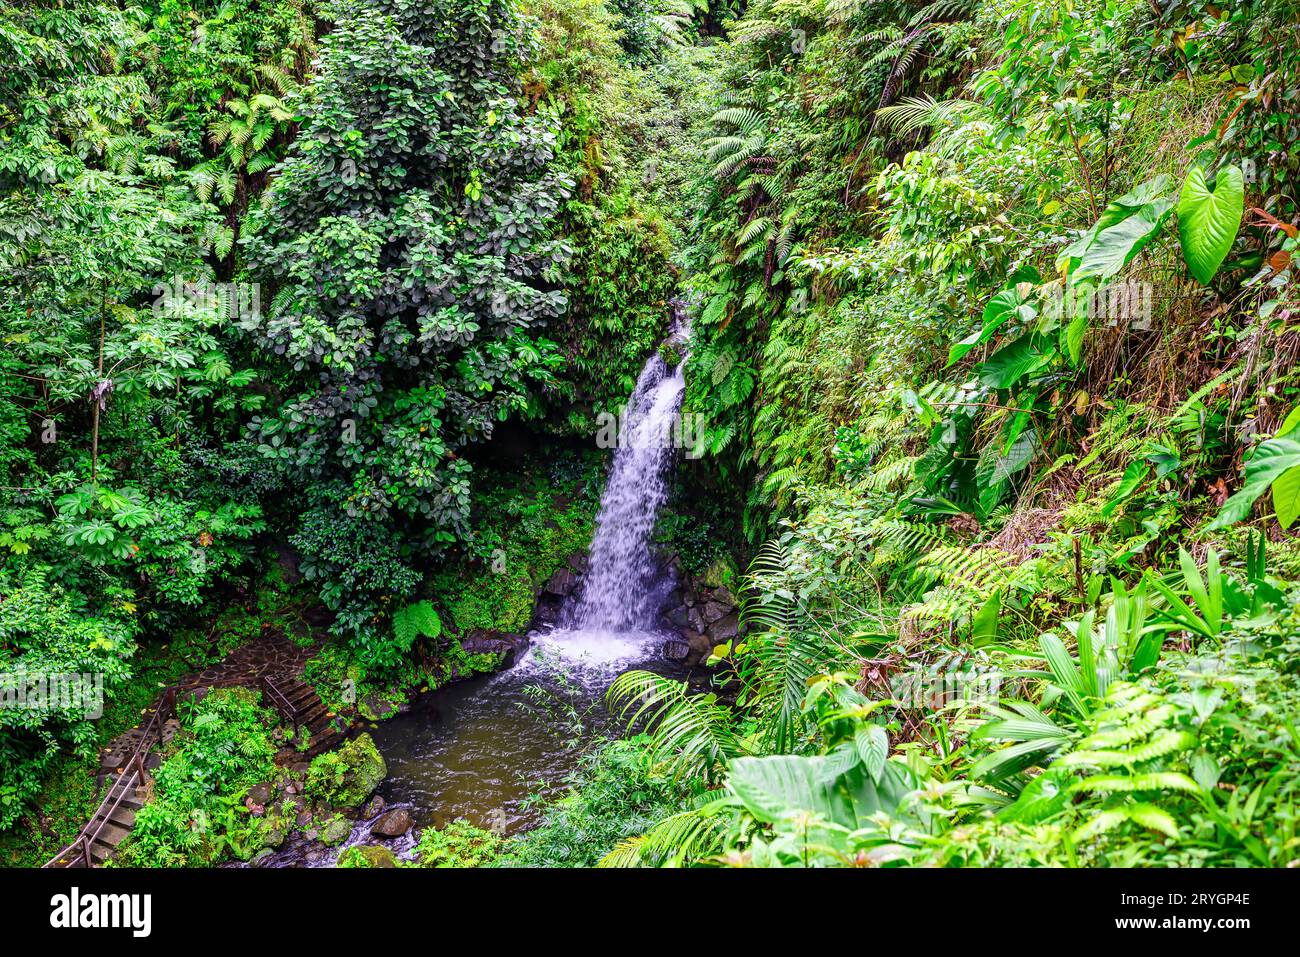 One of the most popular spots on the Caribbean island of Dominica is ...